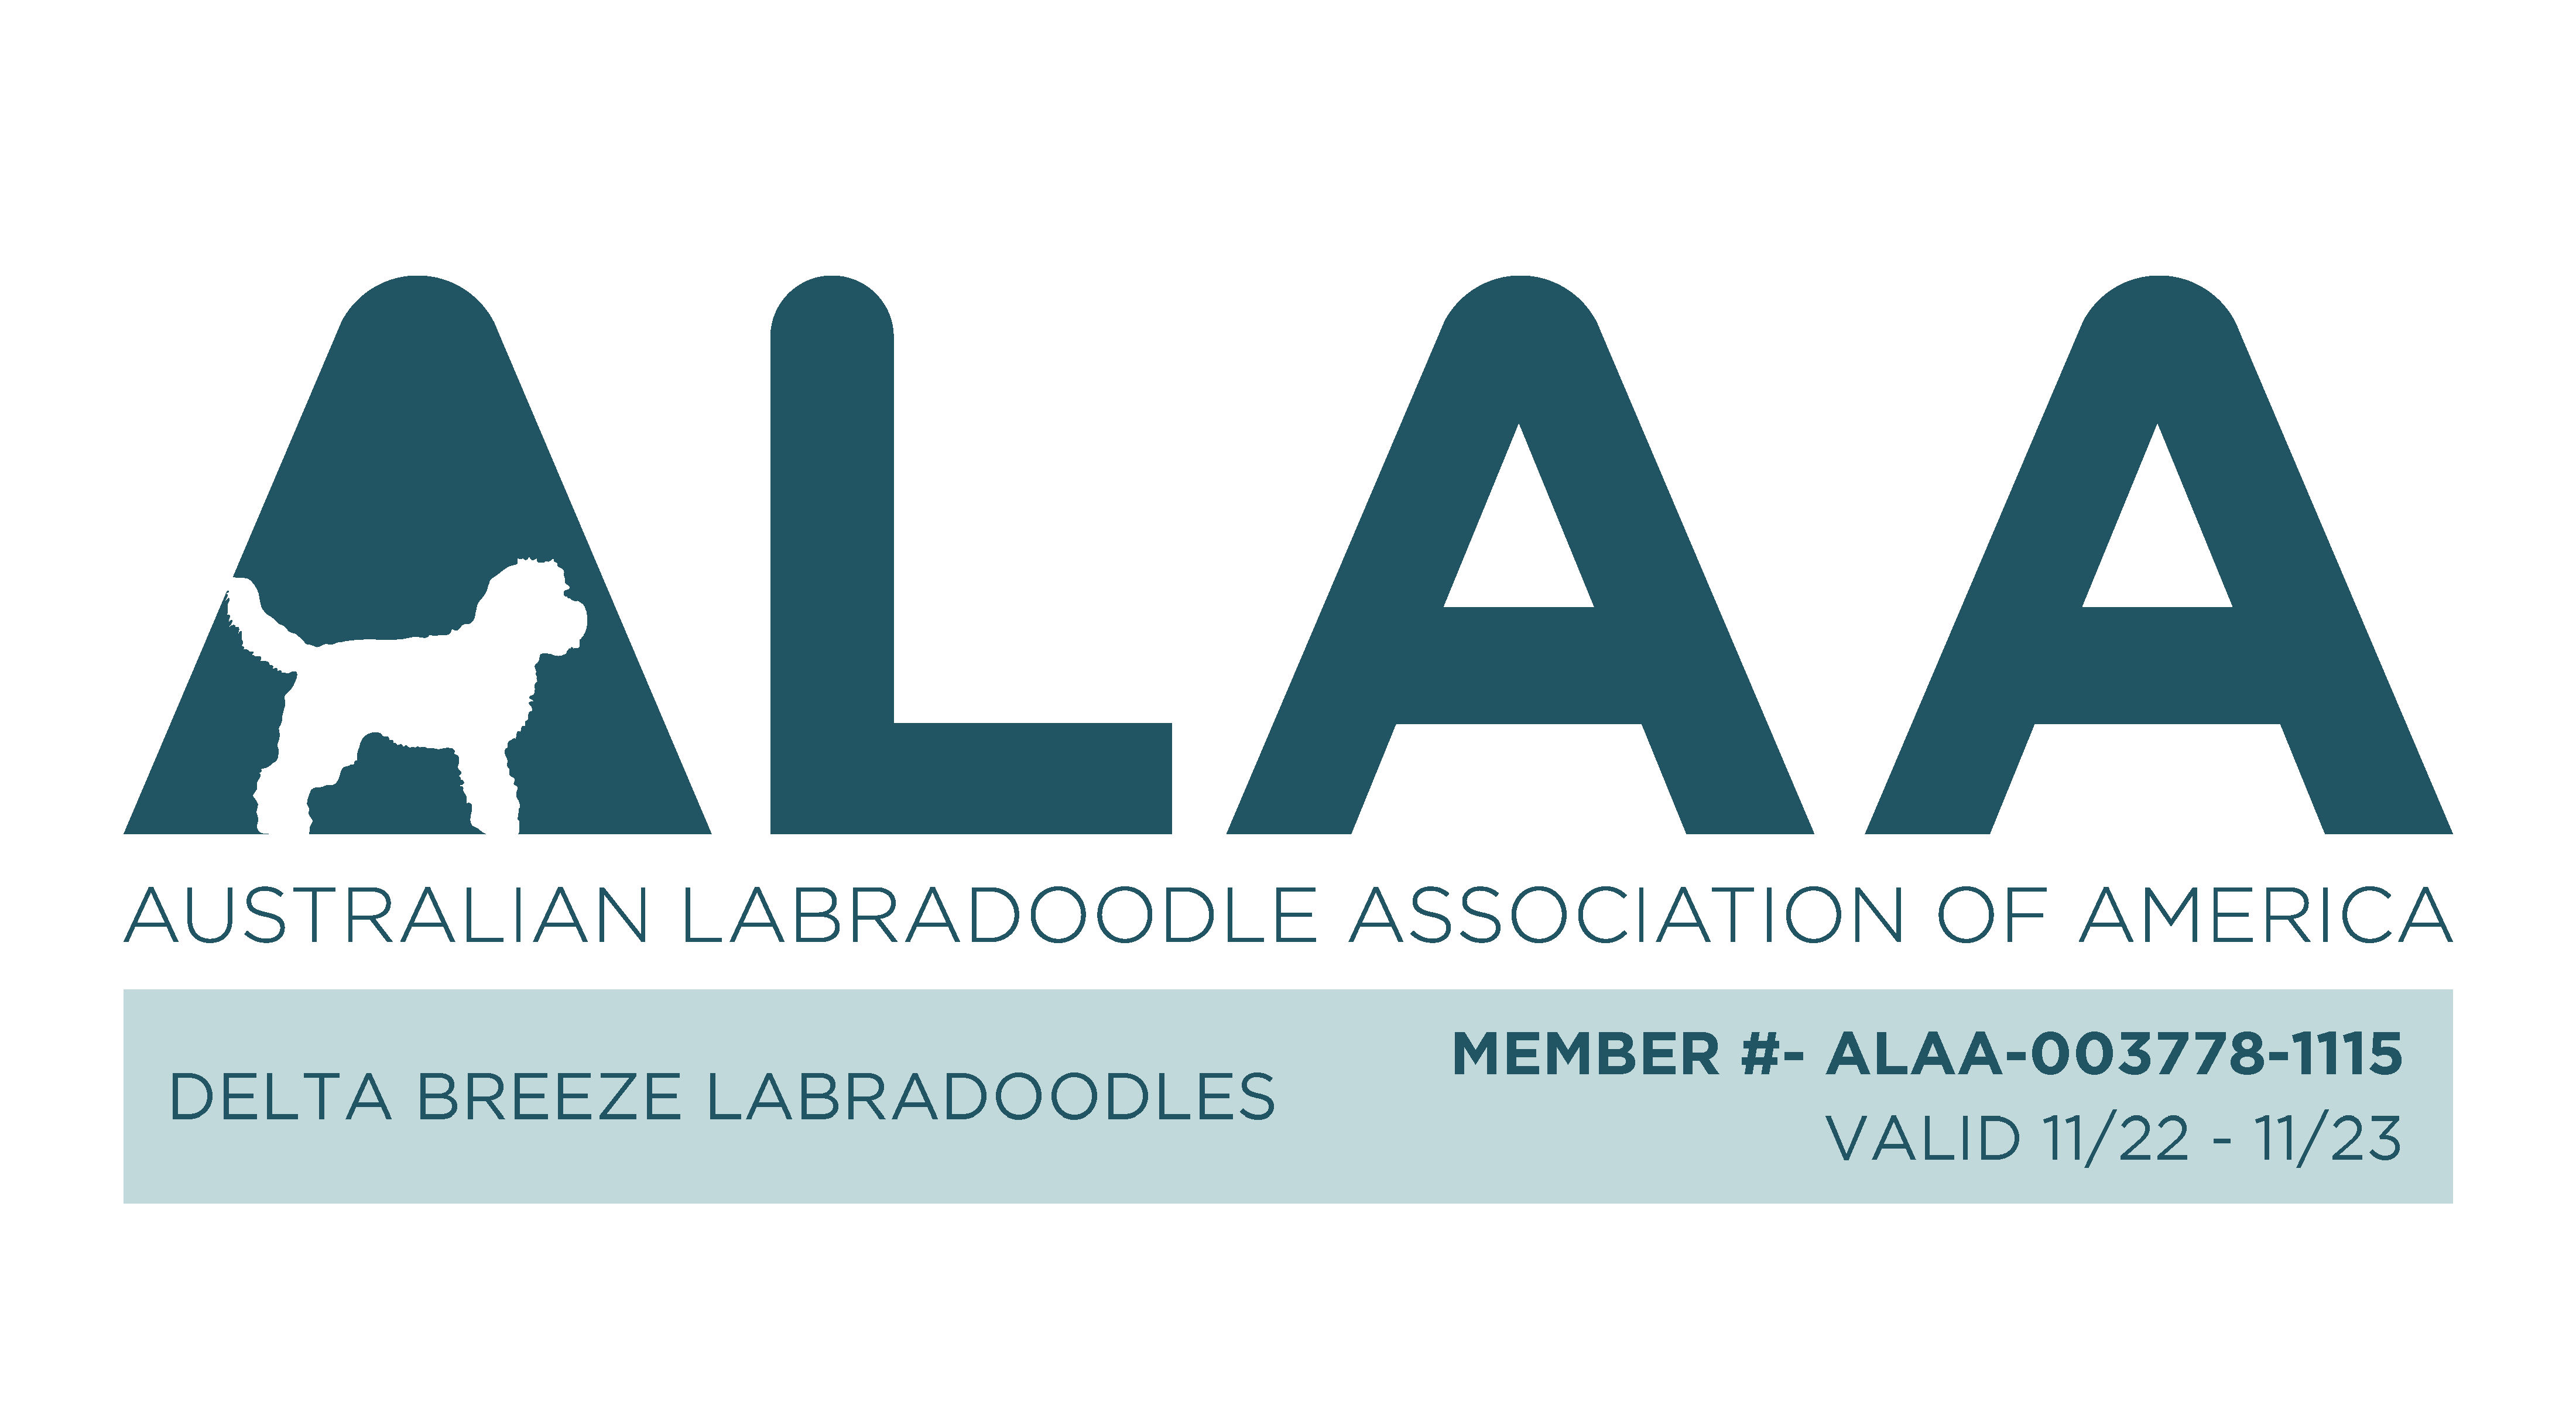 The logo for the australian labradoodle association of america.